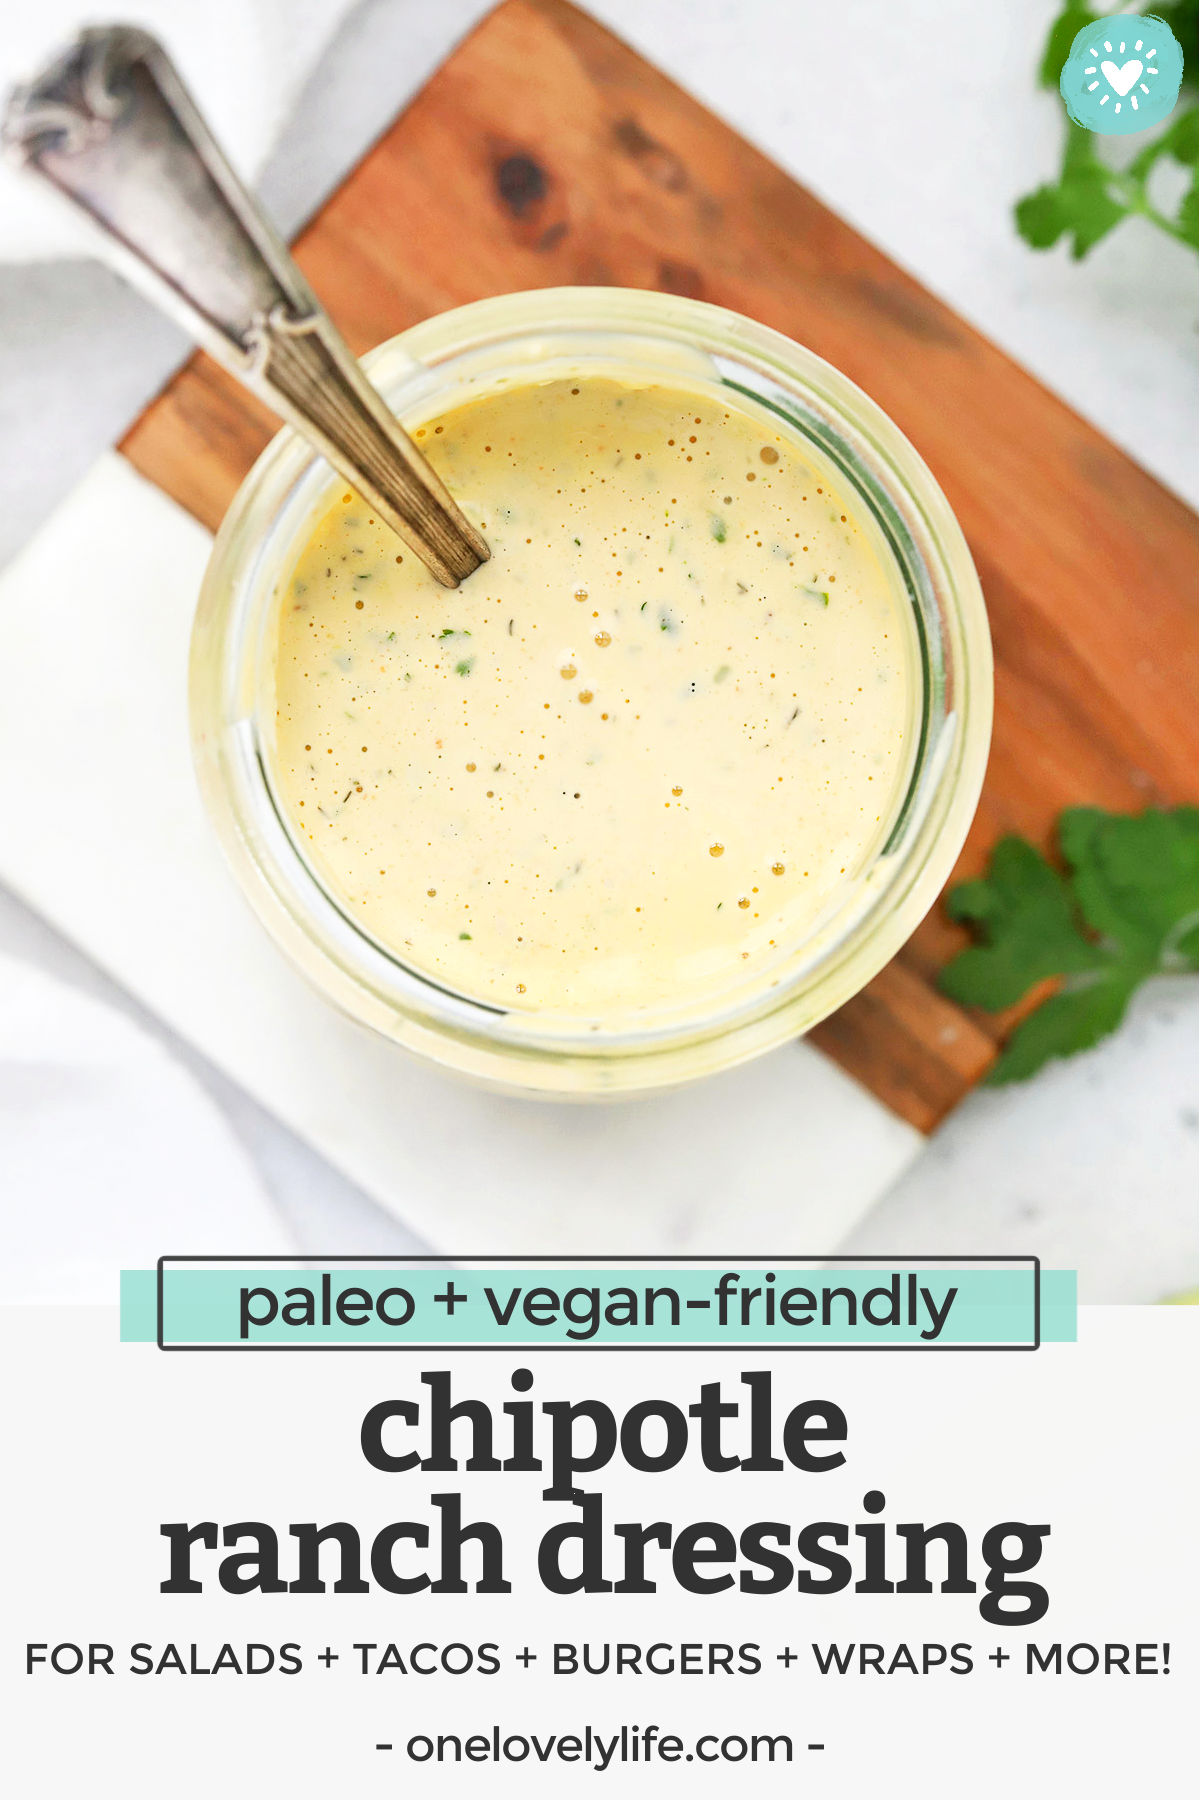 Chipotle Ranch Dressing or Dip - This smoky, slightly spicy ranch dressing is a delicious way to add some kick to your meals. Don't miss our big list of ways to use it! (Dairy-Free, Gluten-Free, Paleo + Vegan Friendly) // Dairy-Free Chipotle Ranch // Vegan Chipotle Ranch // Paleo Chipotle Ranch #ranch #paleo #vegan #dip